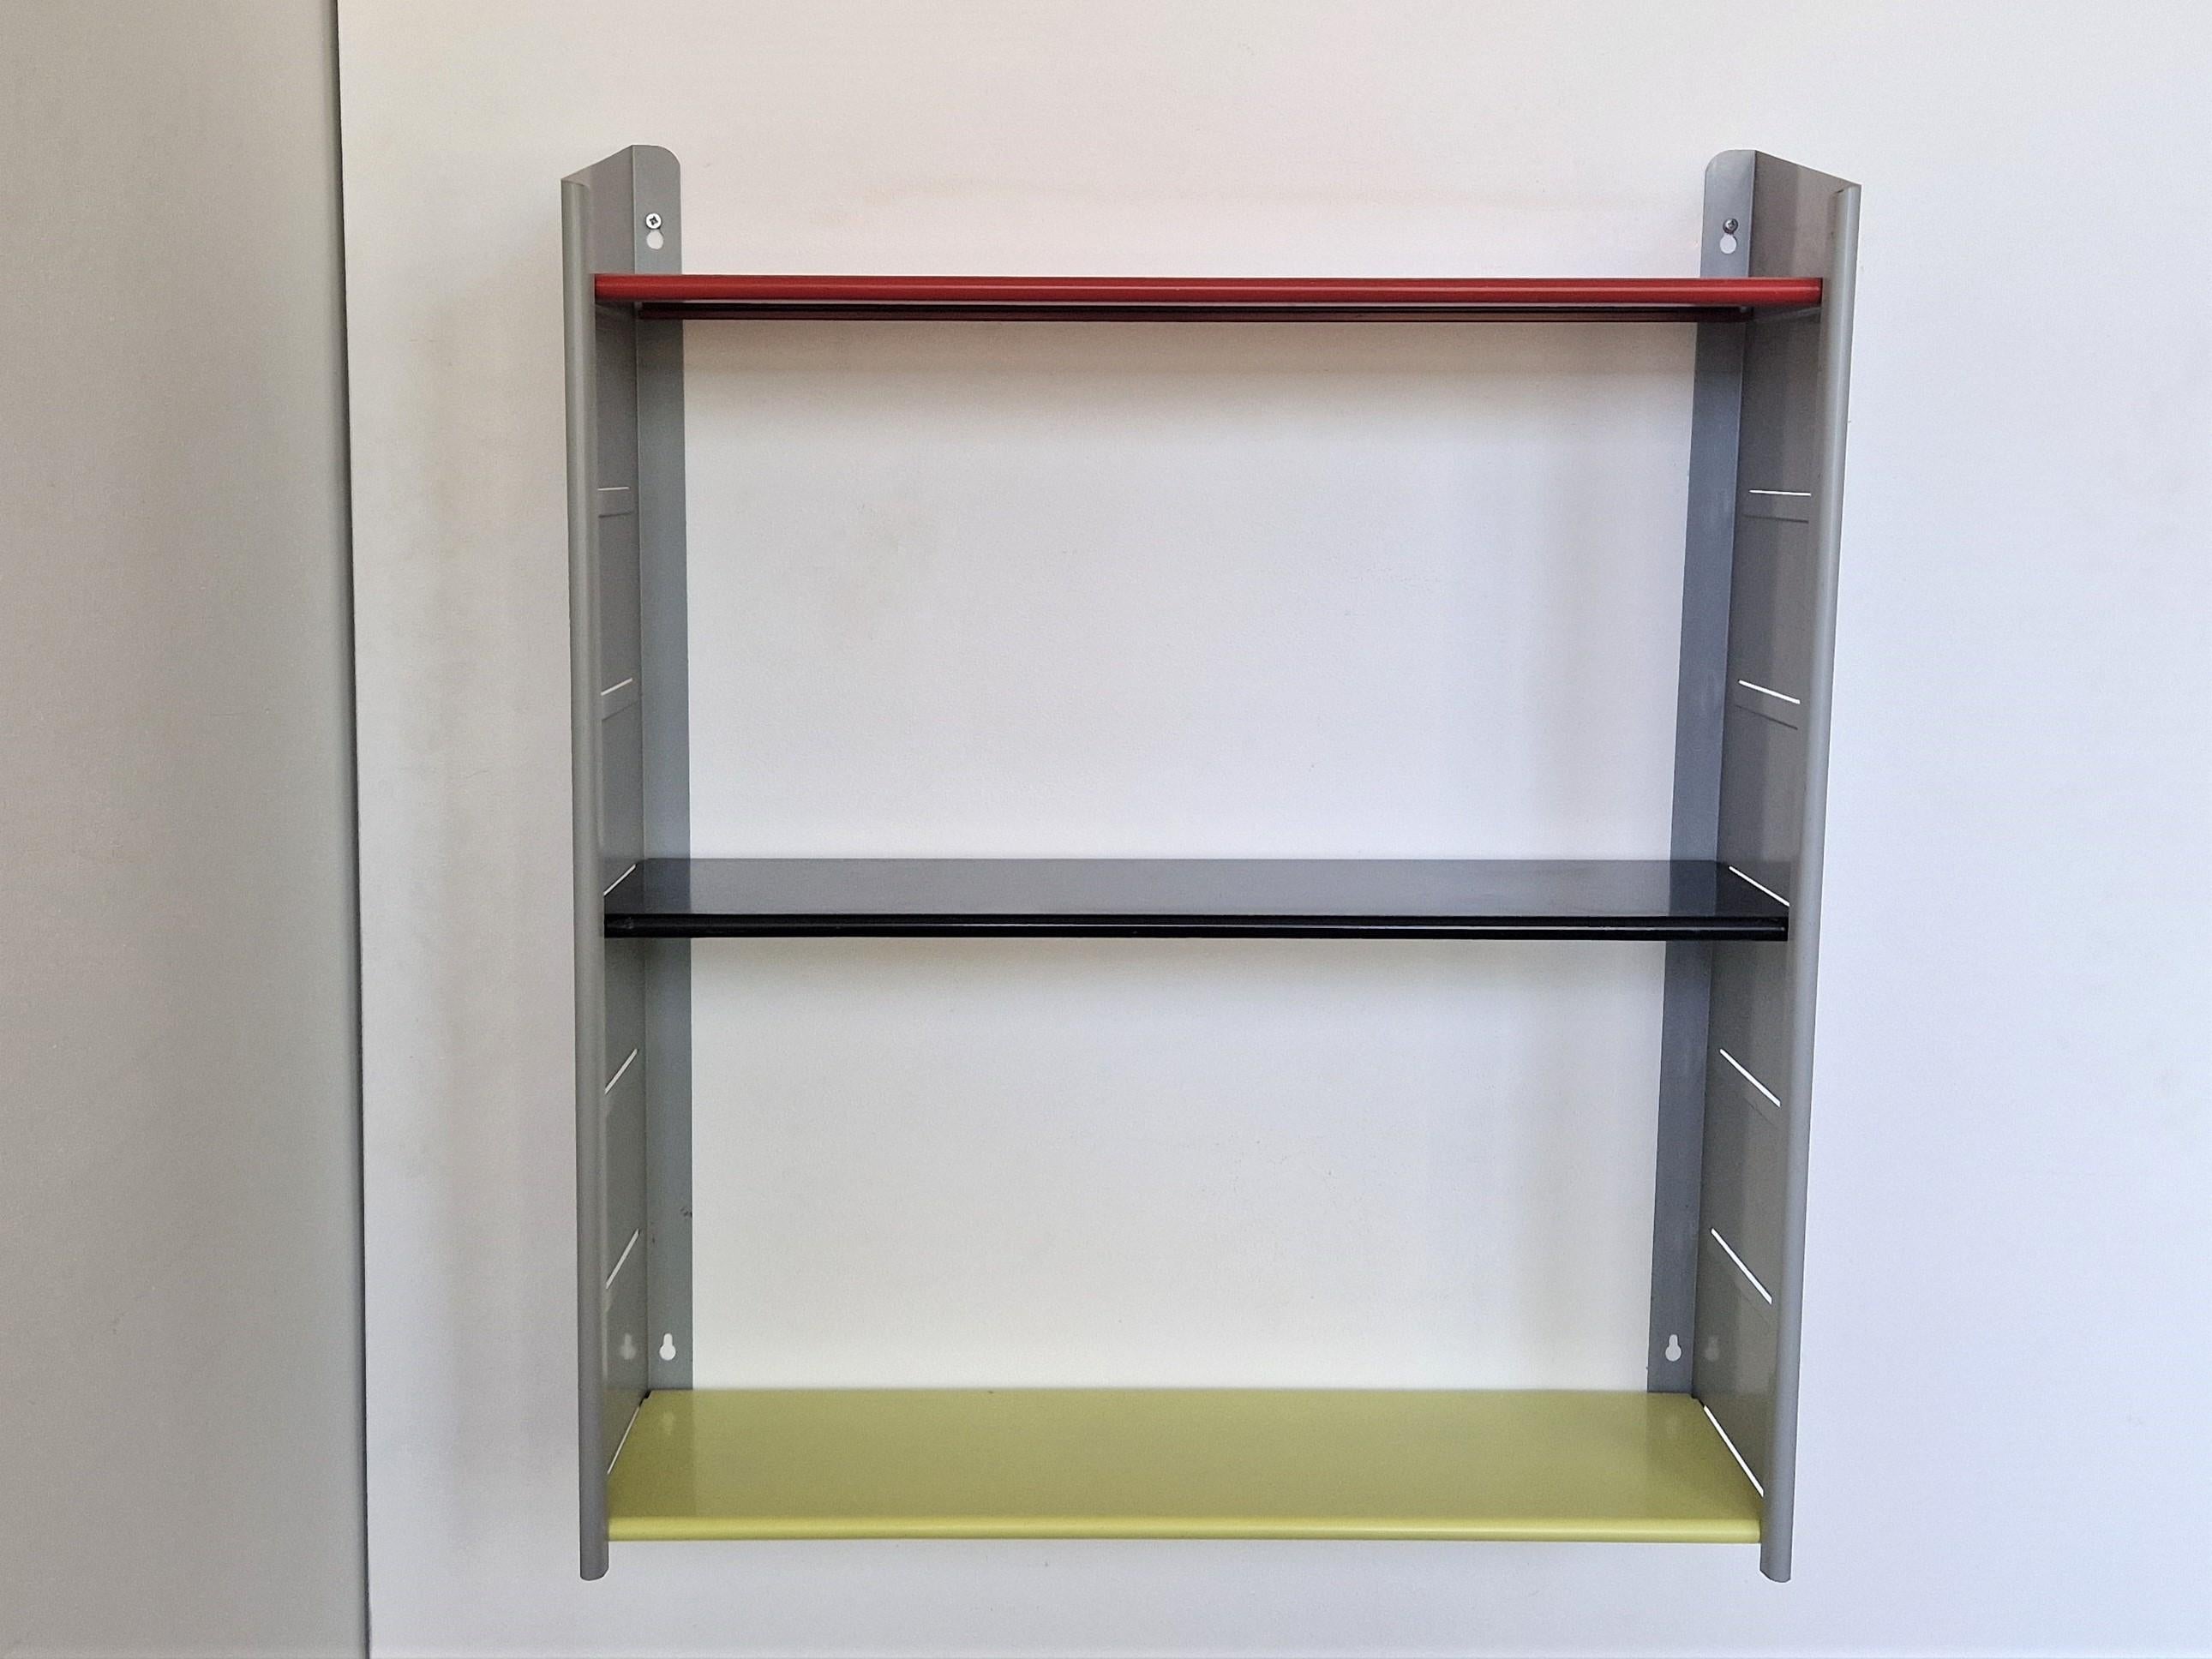 This stunning metal shelving unit was made by the Dutch manufacturer NVF in the 1960's. It is made out of 2 grey lacquered metal wall fixtures and 3 adjustable metal shelves in red, black and yellow. Considering age this unit is in a very good